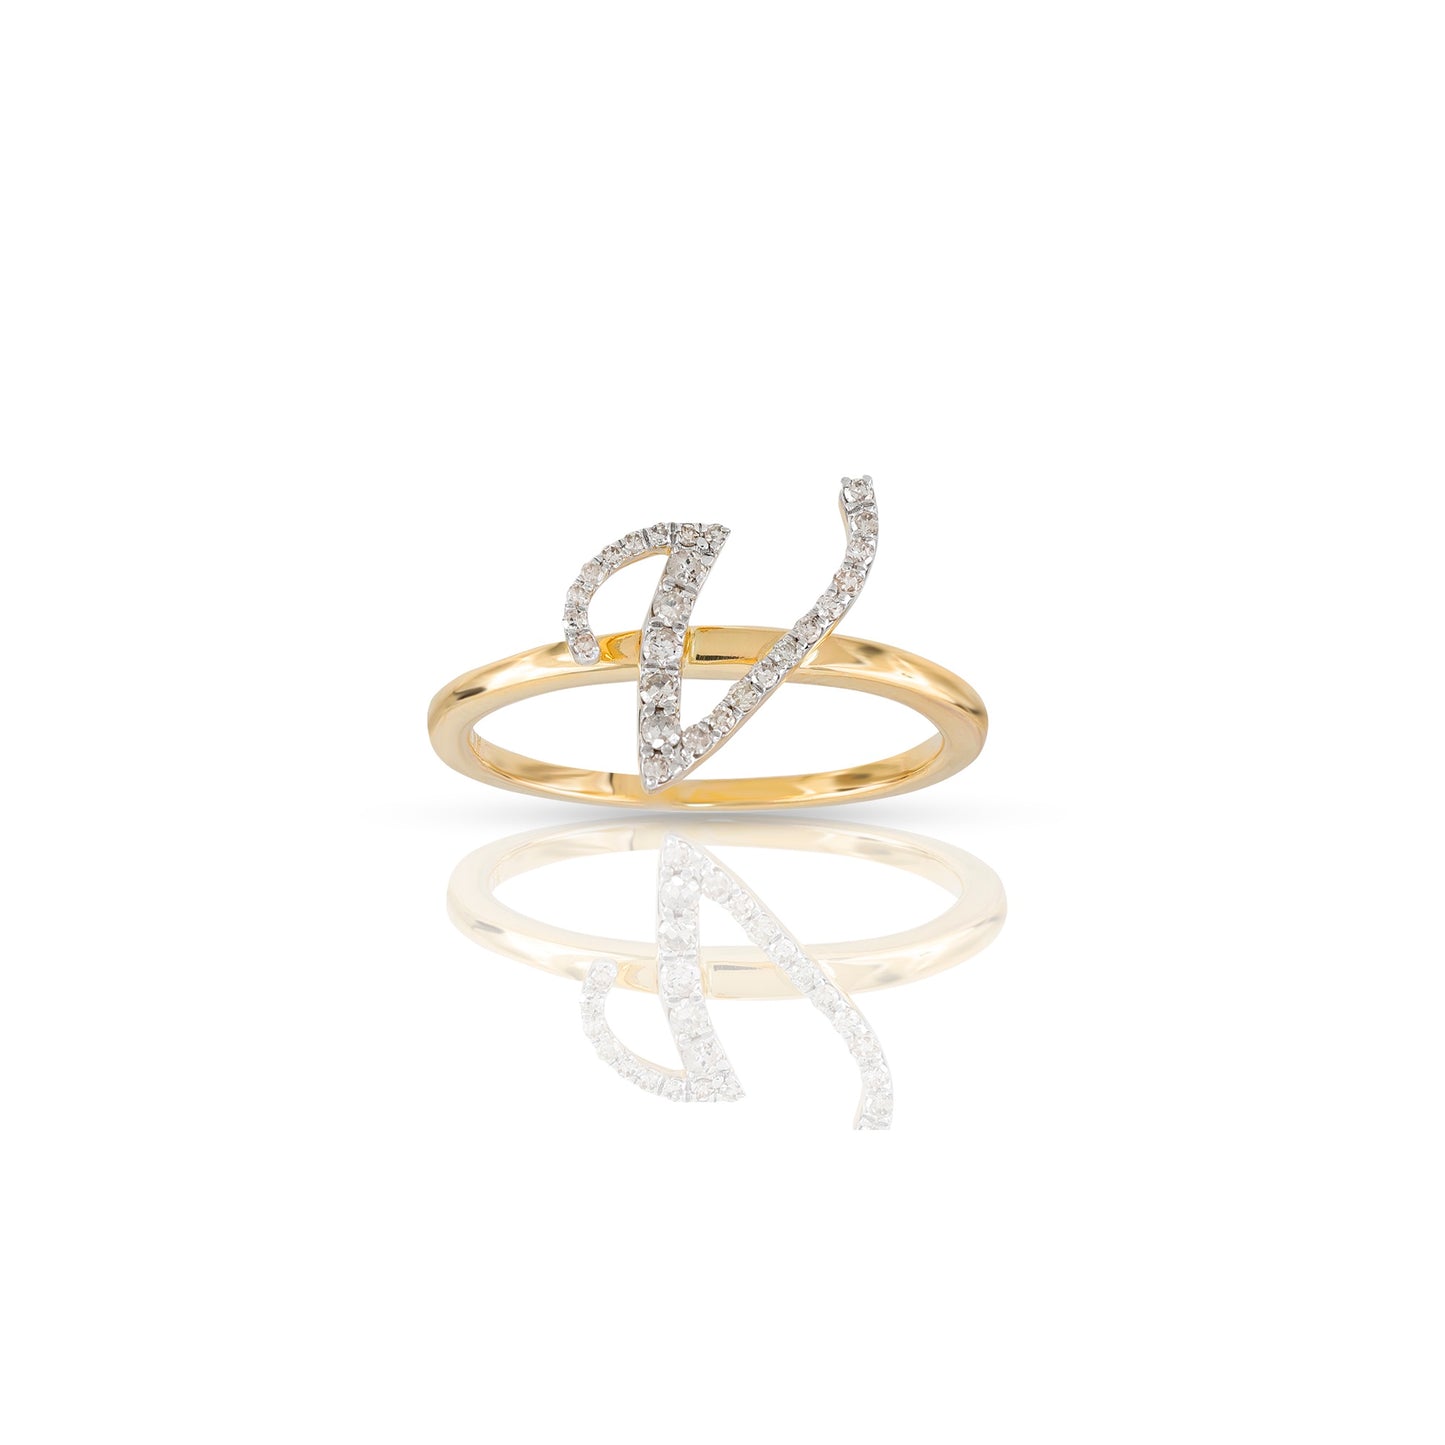 10K Gold Yellow Gold Round Diamond' 'A TO Z' Initial Letter Ring by Truth jewel